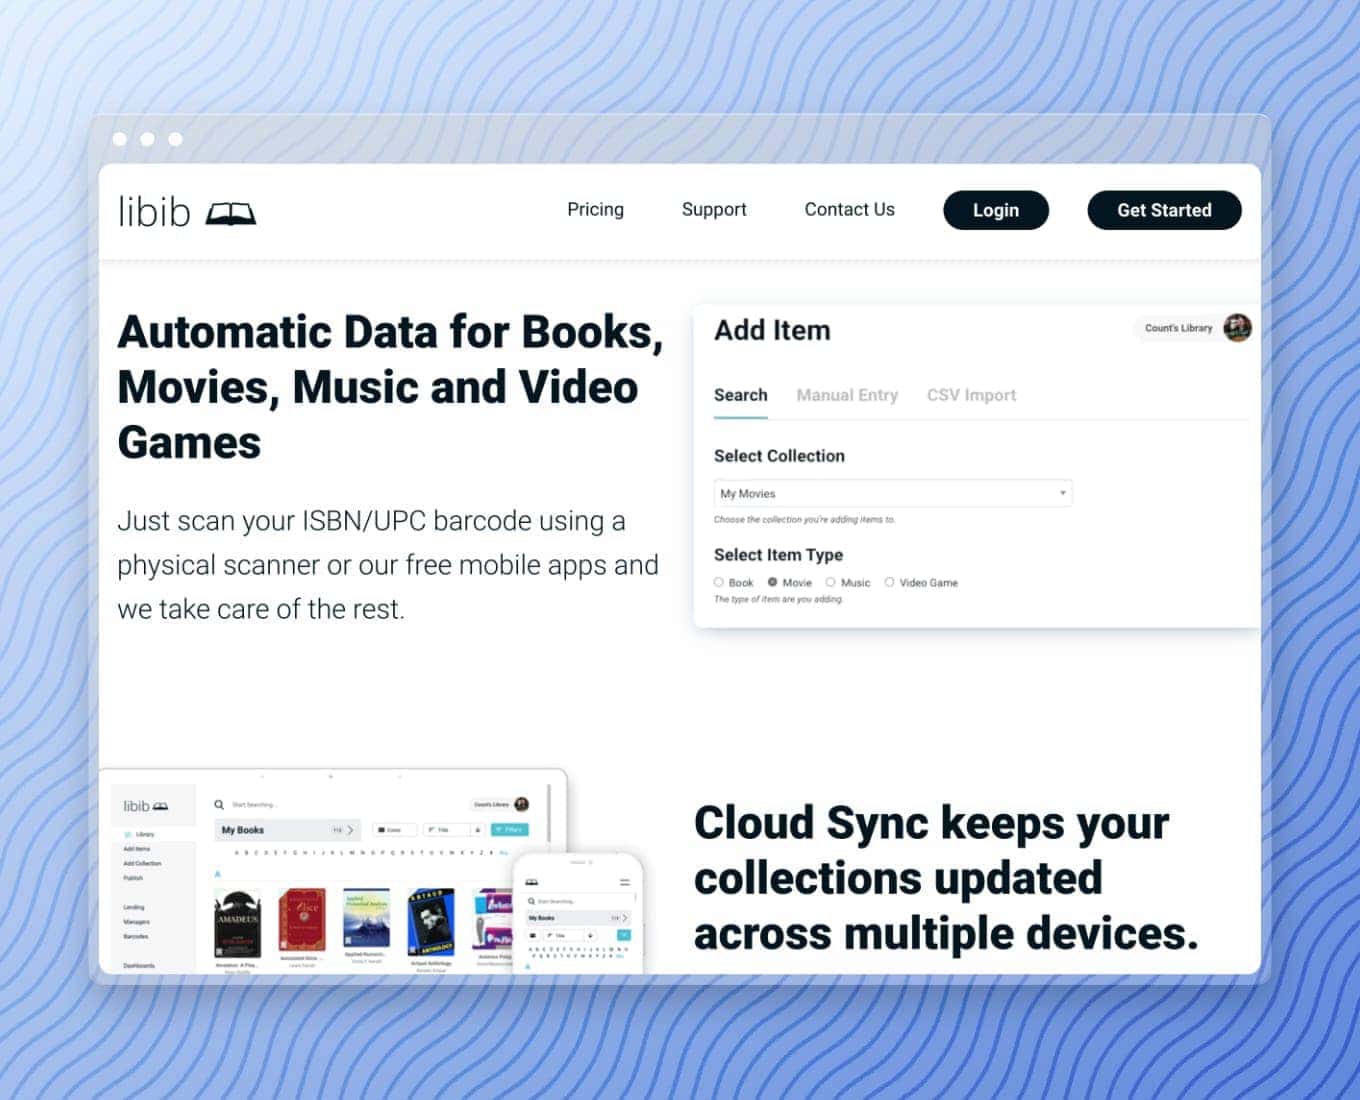 Libib: Automatic data for books, movies, music, and video games